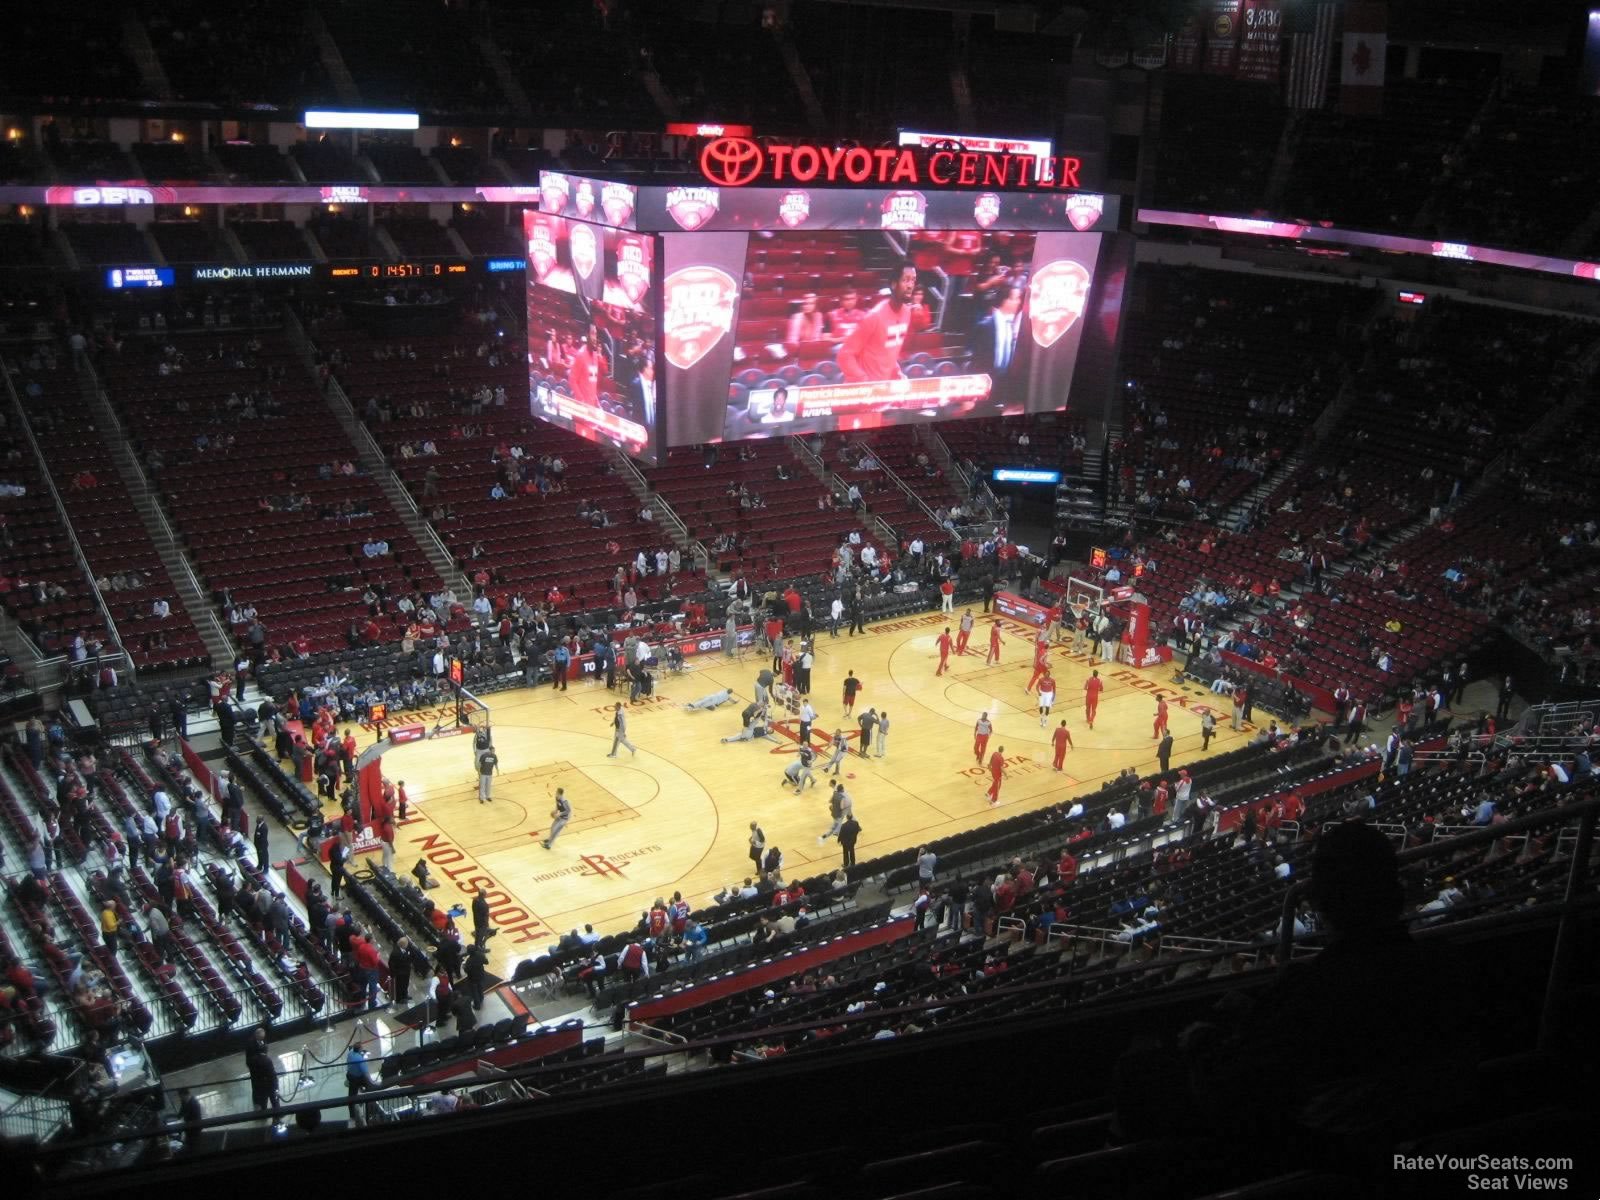 Basketball Seat View From Section 413, Row 6. section 413, row 6 seat view ...